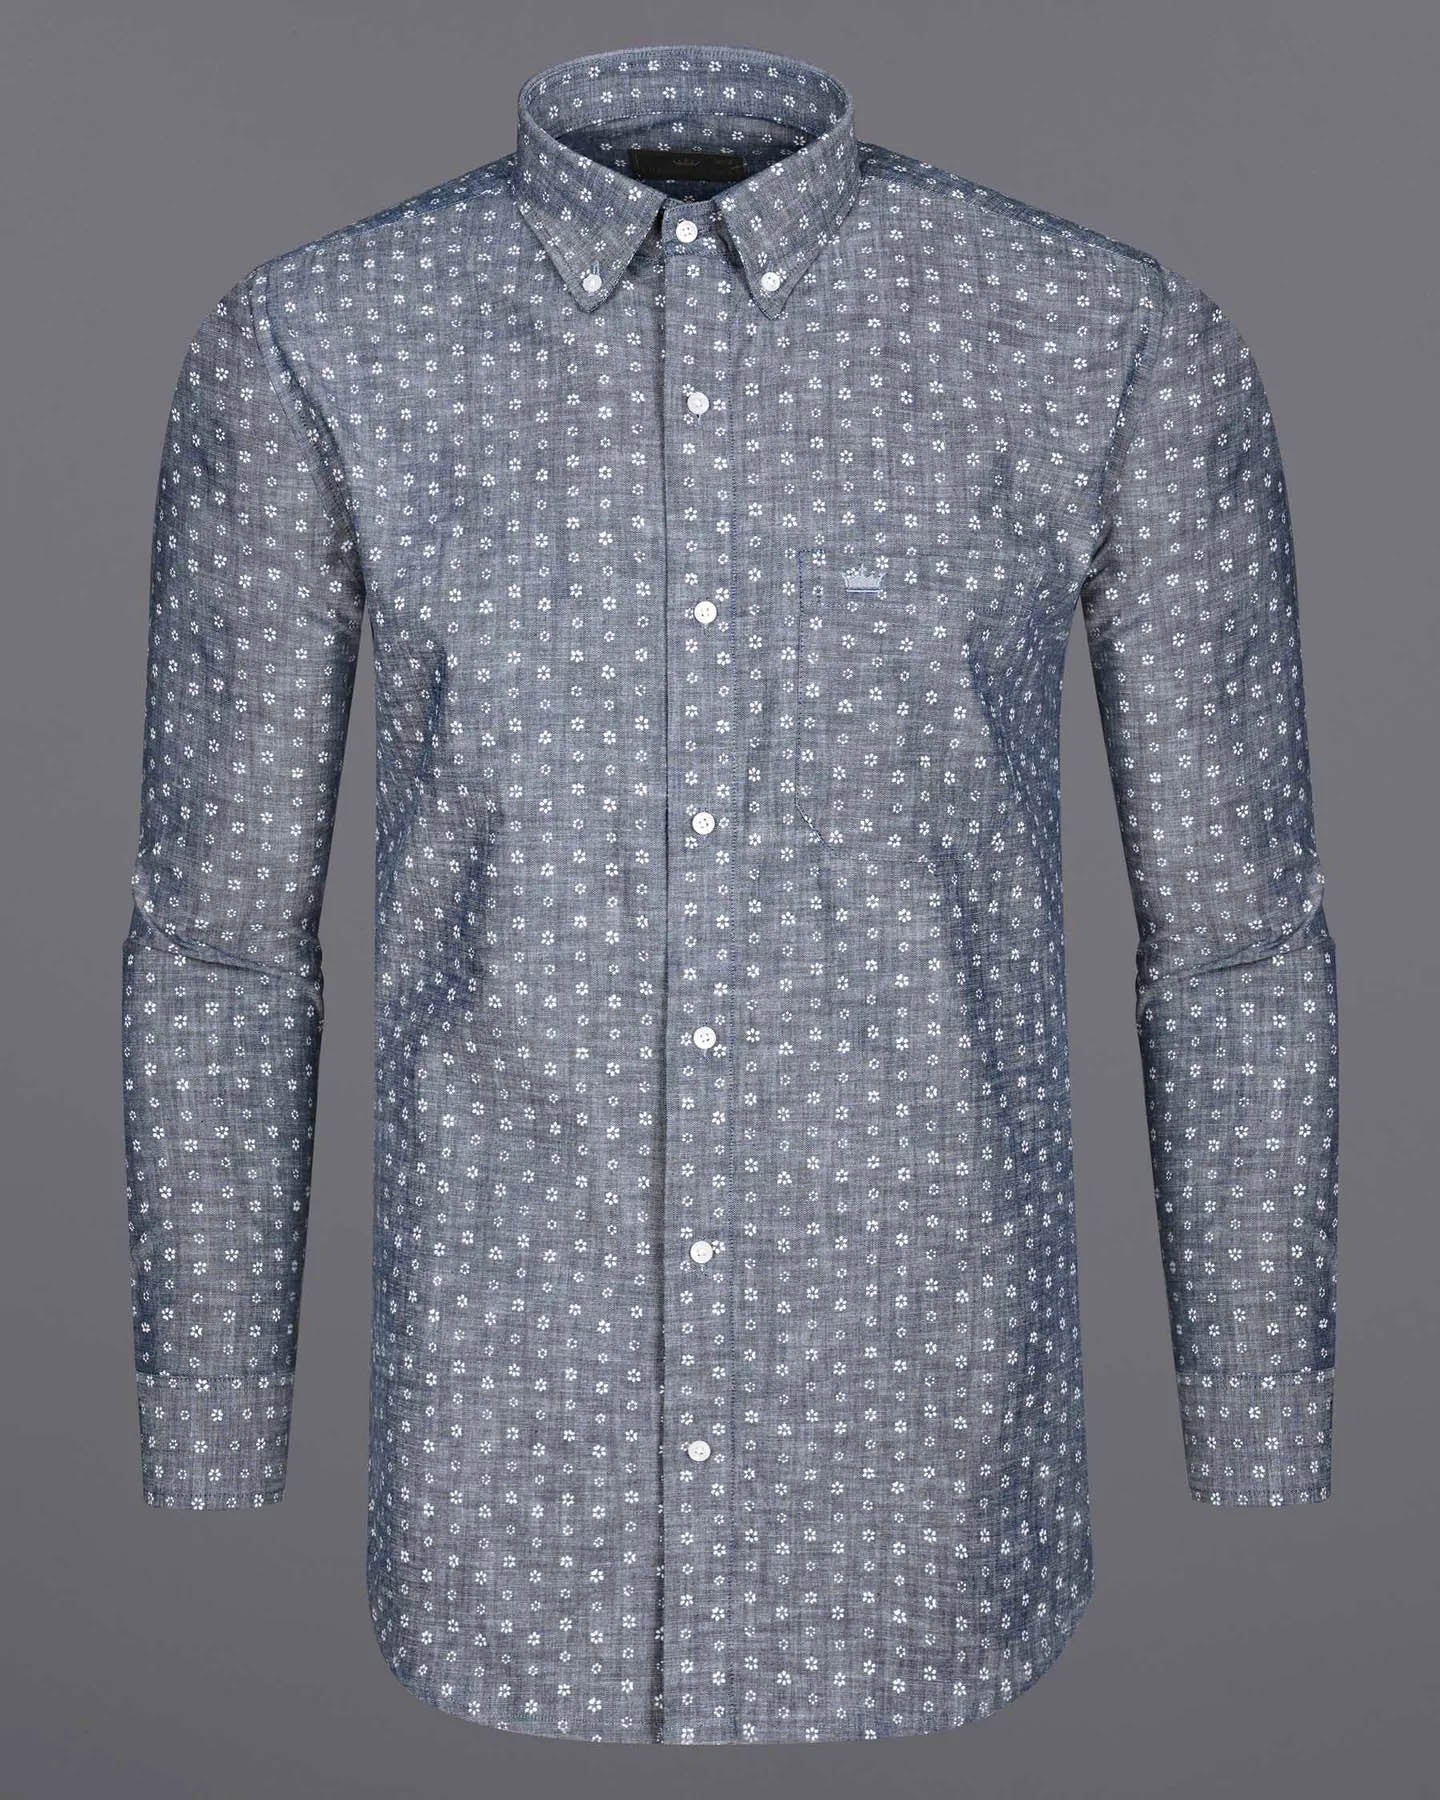 East Bay Gray Ditzy Floral Printed Chambray Premium Cotton Shirt